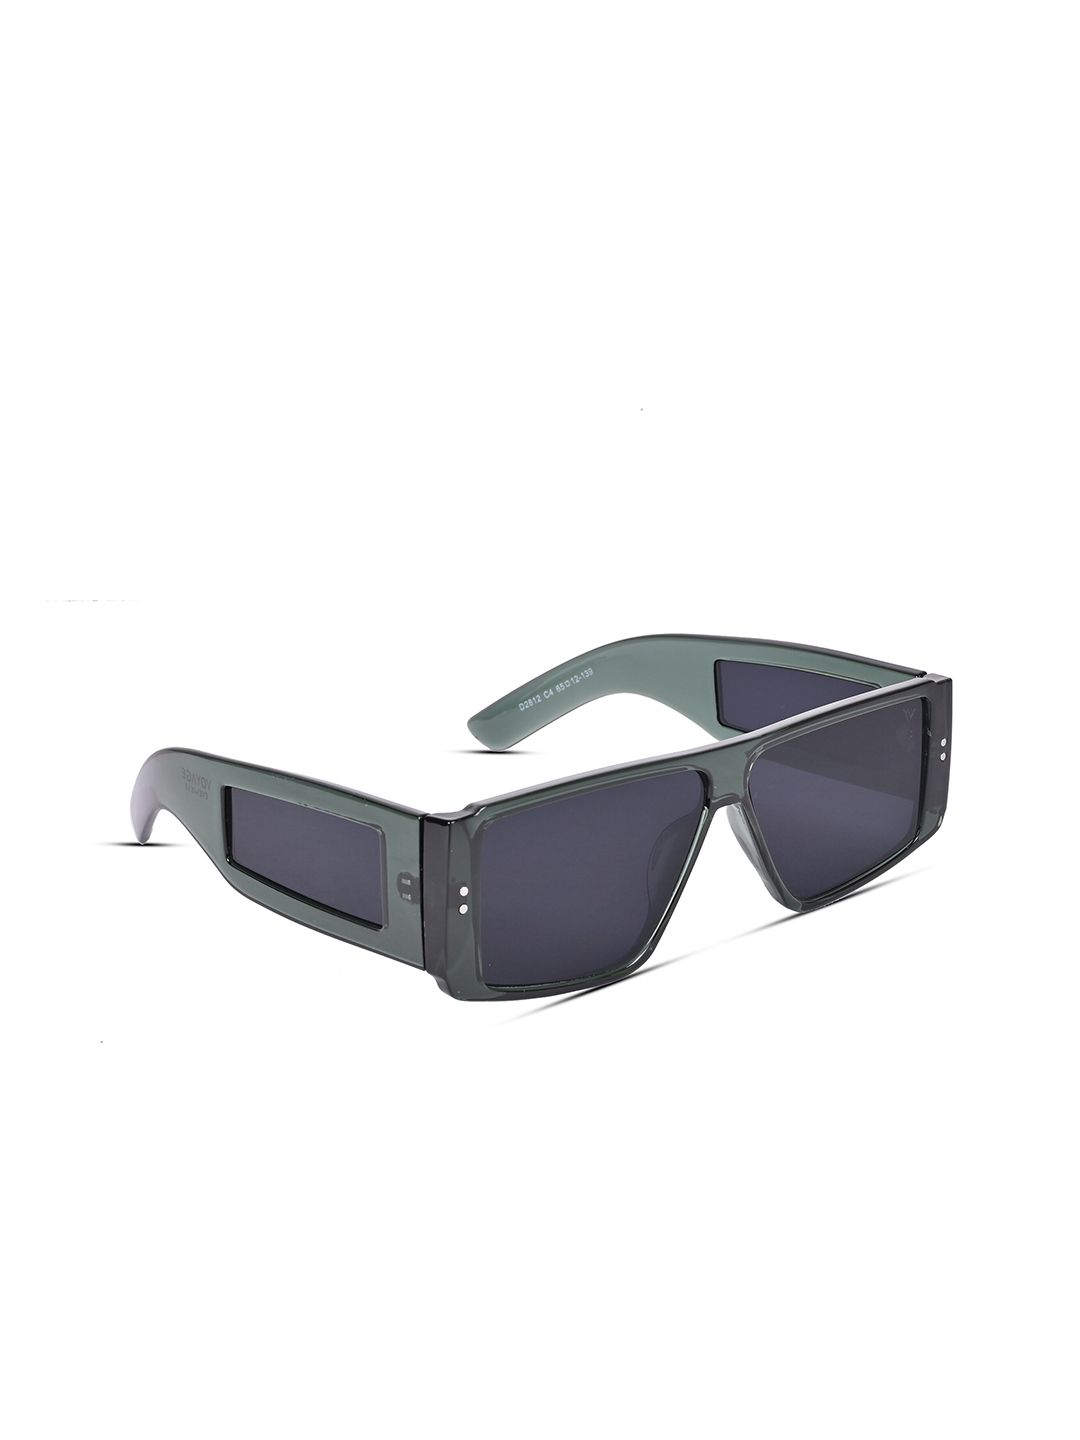 Voyage Unisex Black Lens & Green Wayfarer Sunglasses with UV Protected Lens Price in India